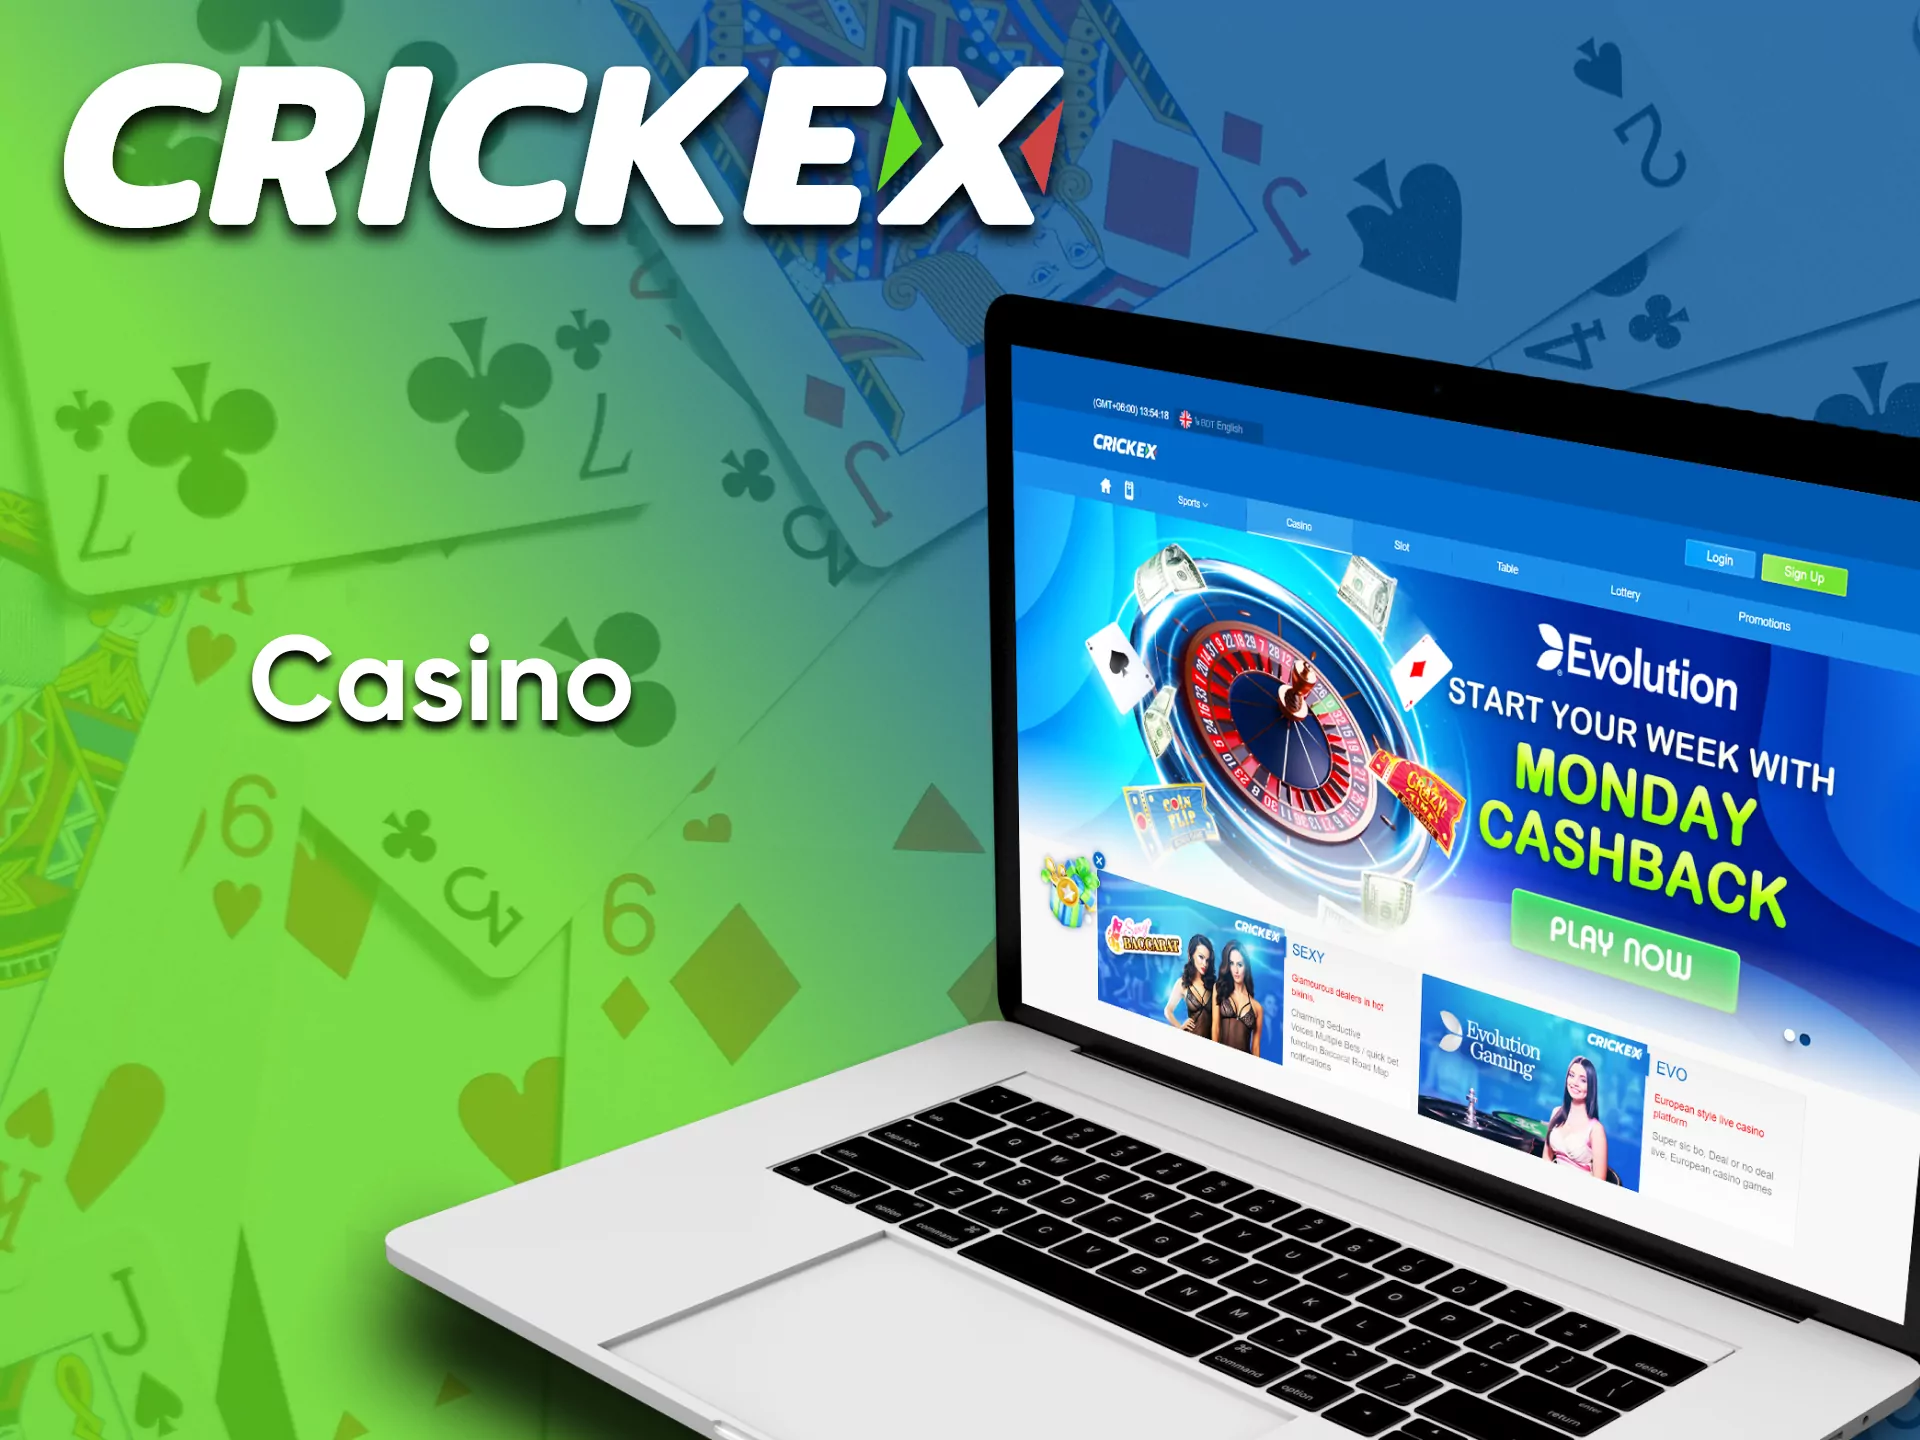 Use the Crickex casino to play games and win real money.